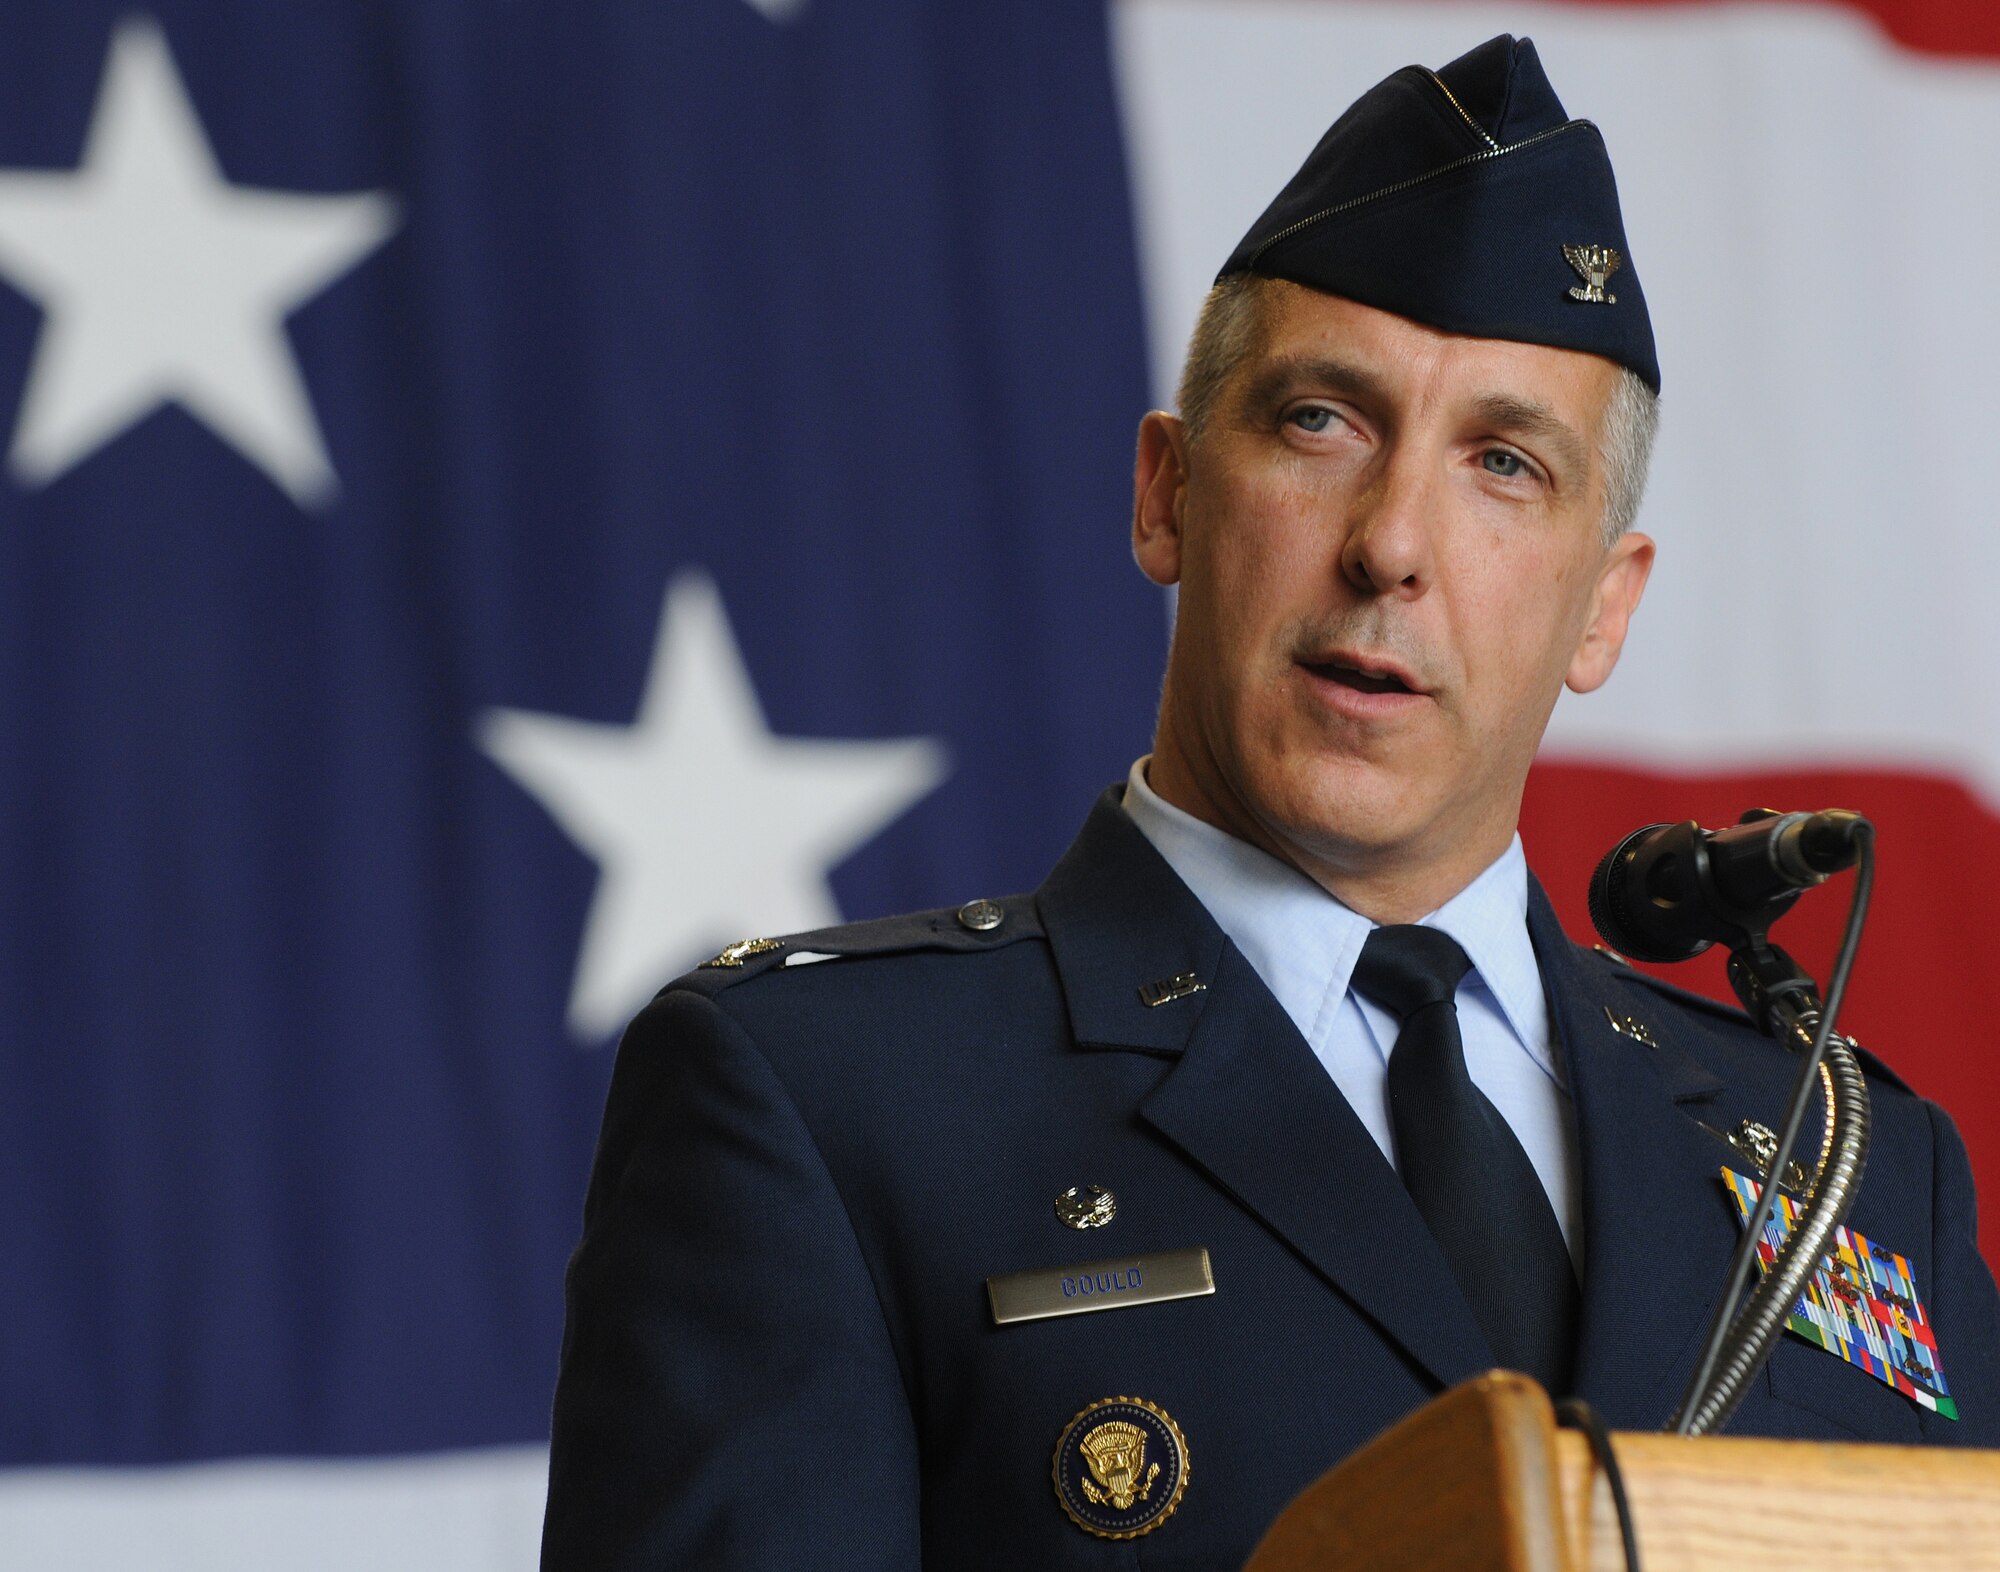 U.S. Air Force Col. Thomas F. Gould, 435th Air Ground Operations Wing commander, addresses the crowd during the 435th Air Base Wing redesignation ceremony, Ramstein Air Base, Germany, July 16, 2009. During the ceremony, the 435th ABW was redesignated to the 435th AGOW, the first of its kind in U.S. Air Forces in Europe. (U.S. Air Force photo by Senior Airman Nathan Lipscomb)